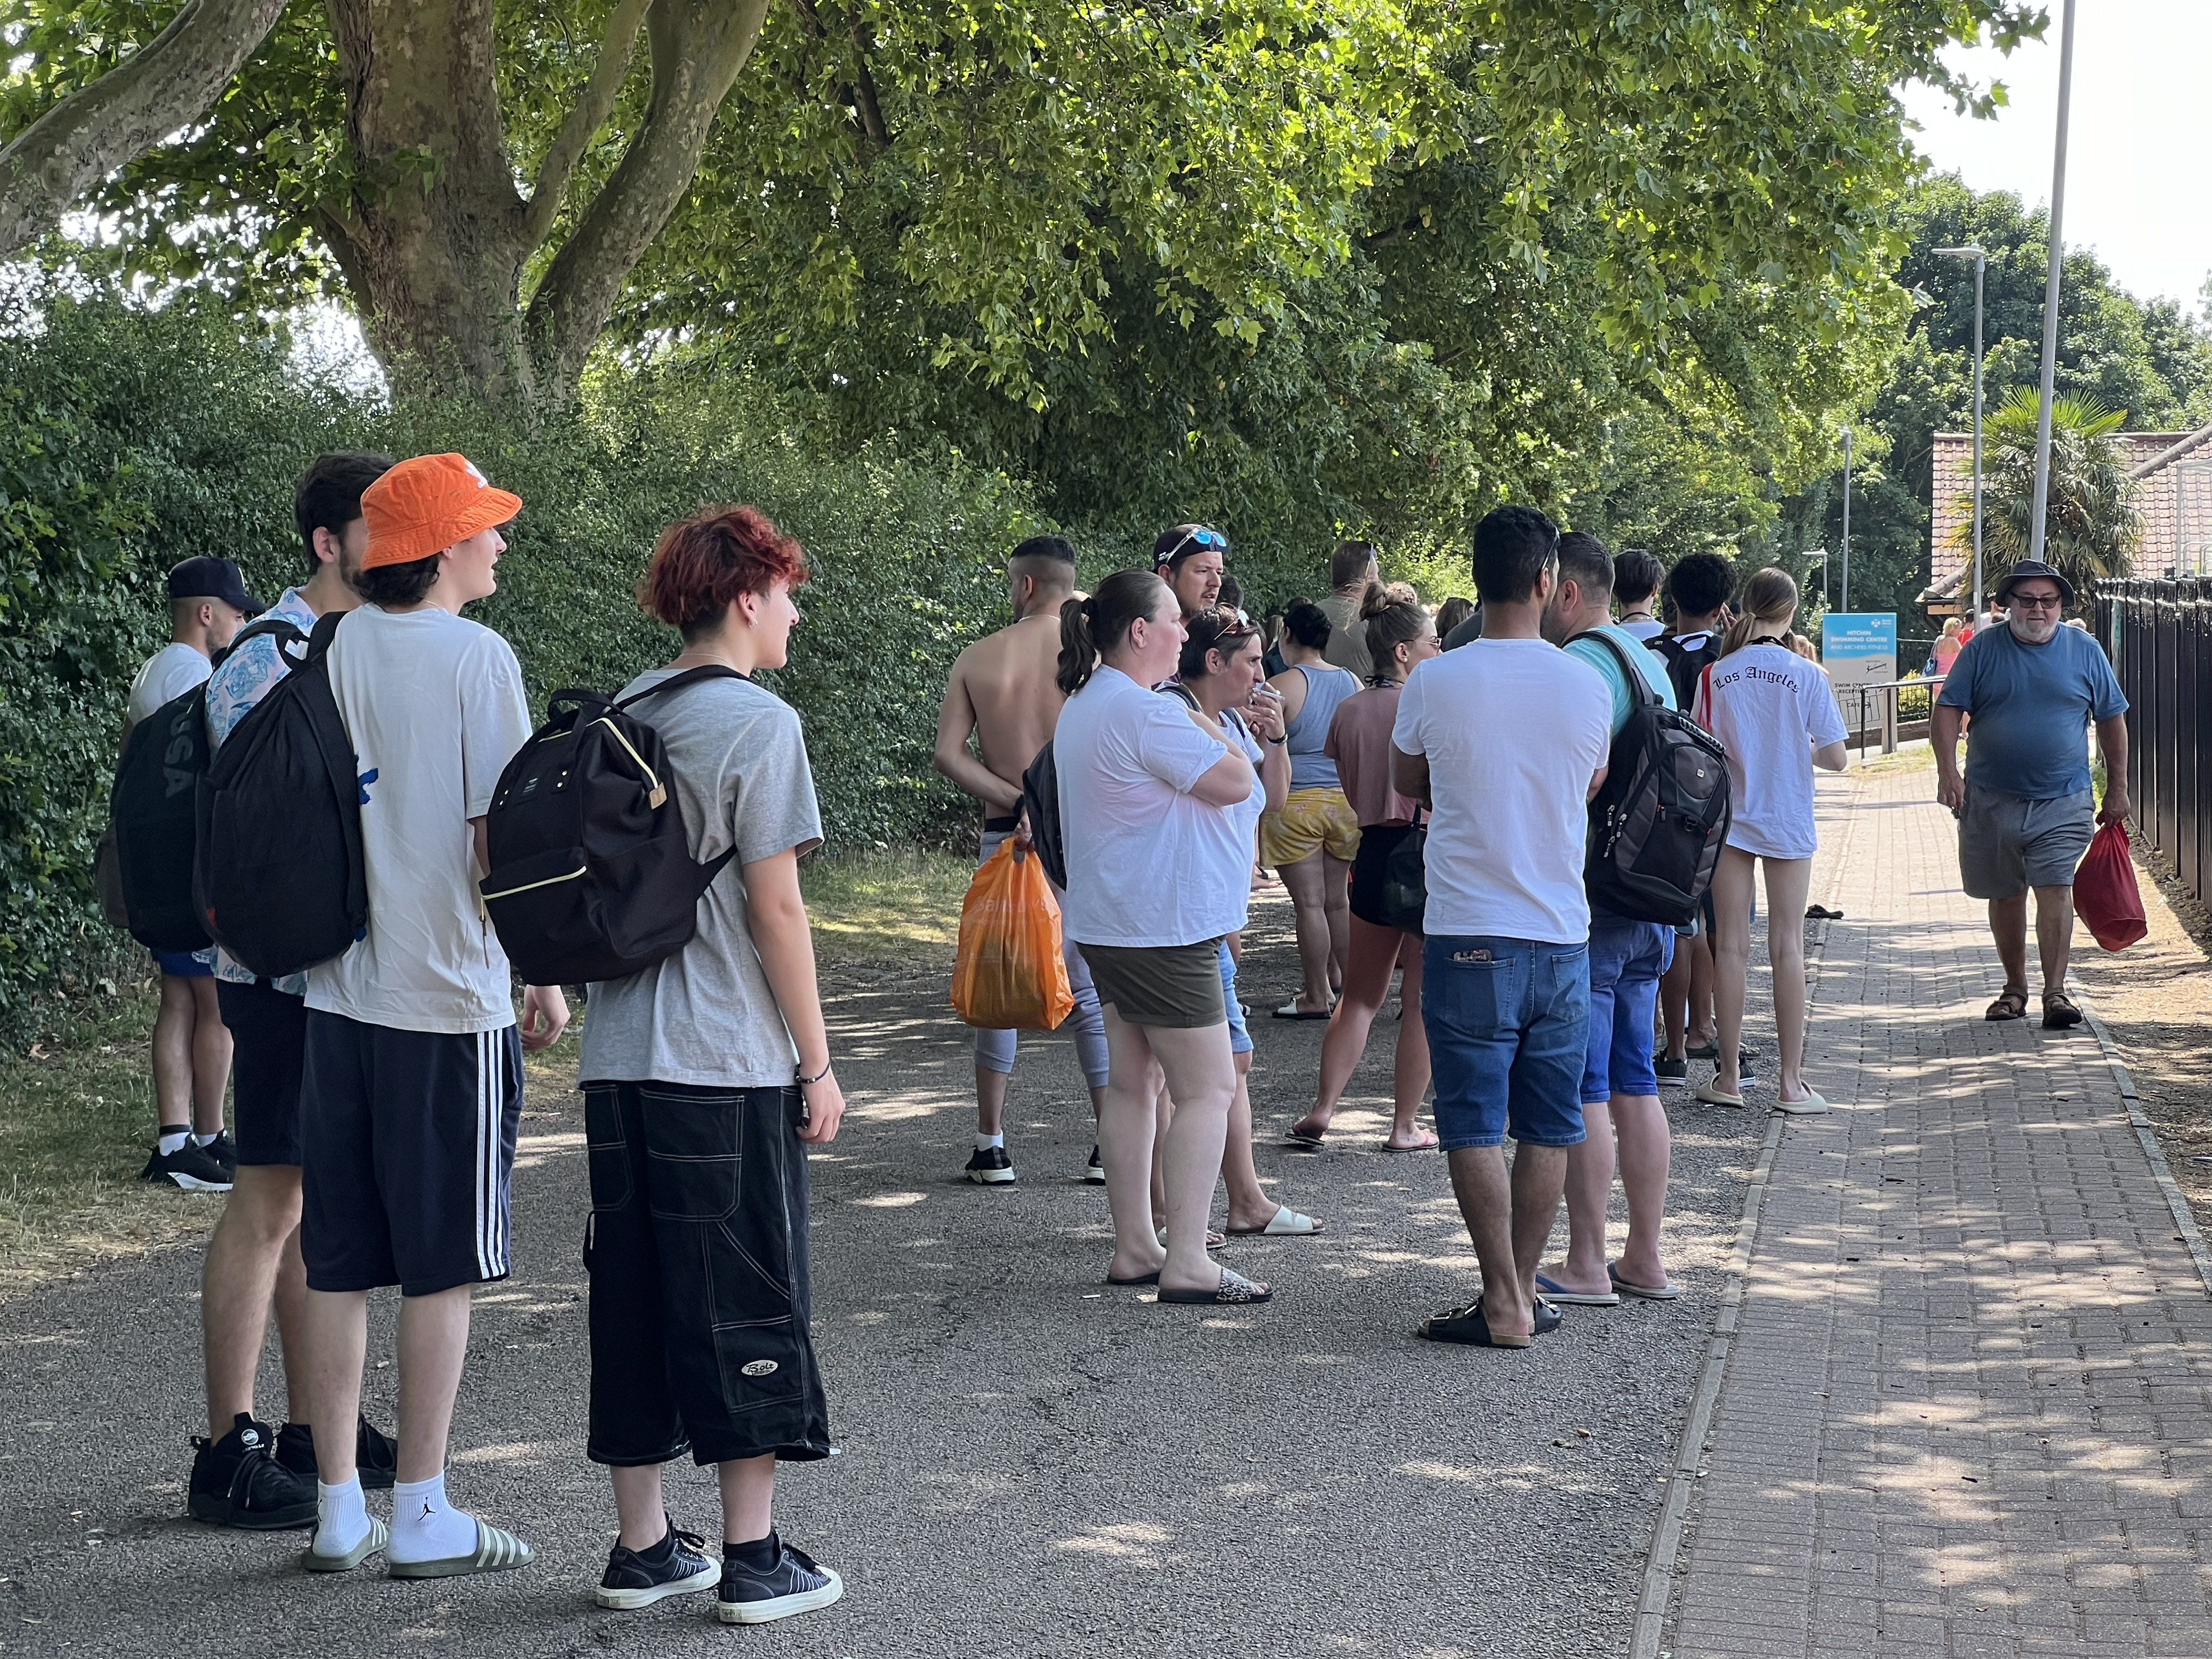 Long queues have formed to get into Hitchin outdoor pool on Monday. CREDIT: @HitchinNubNews 